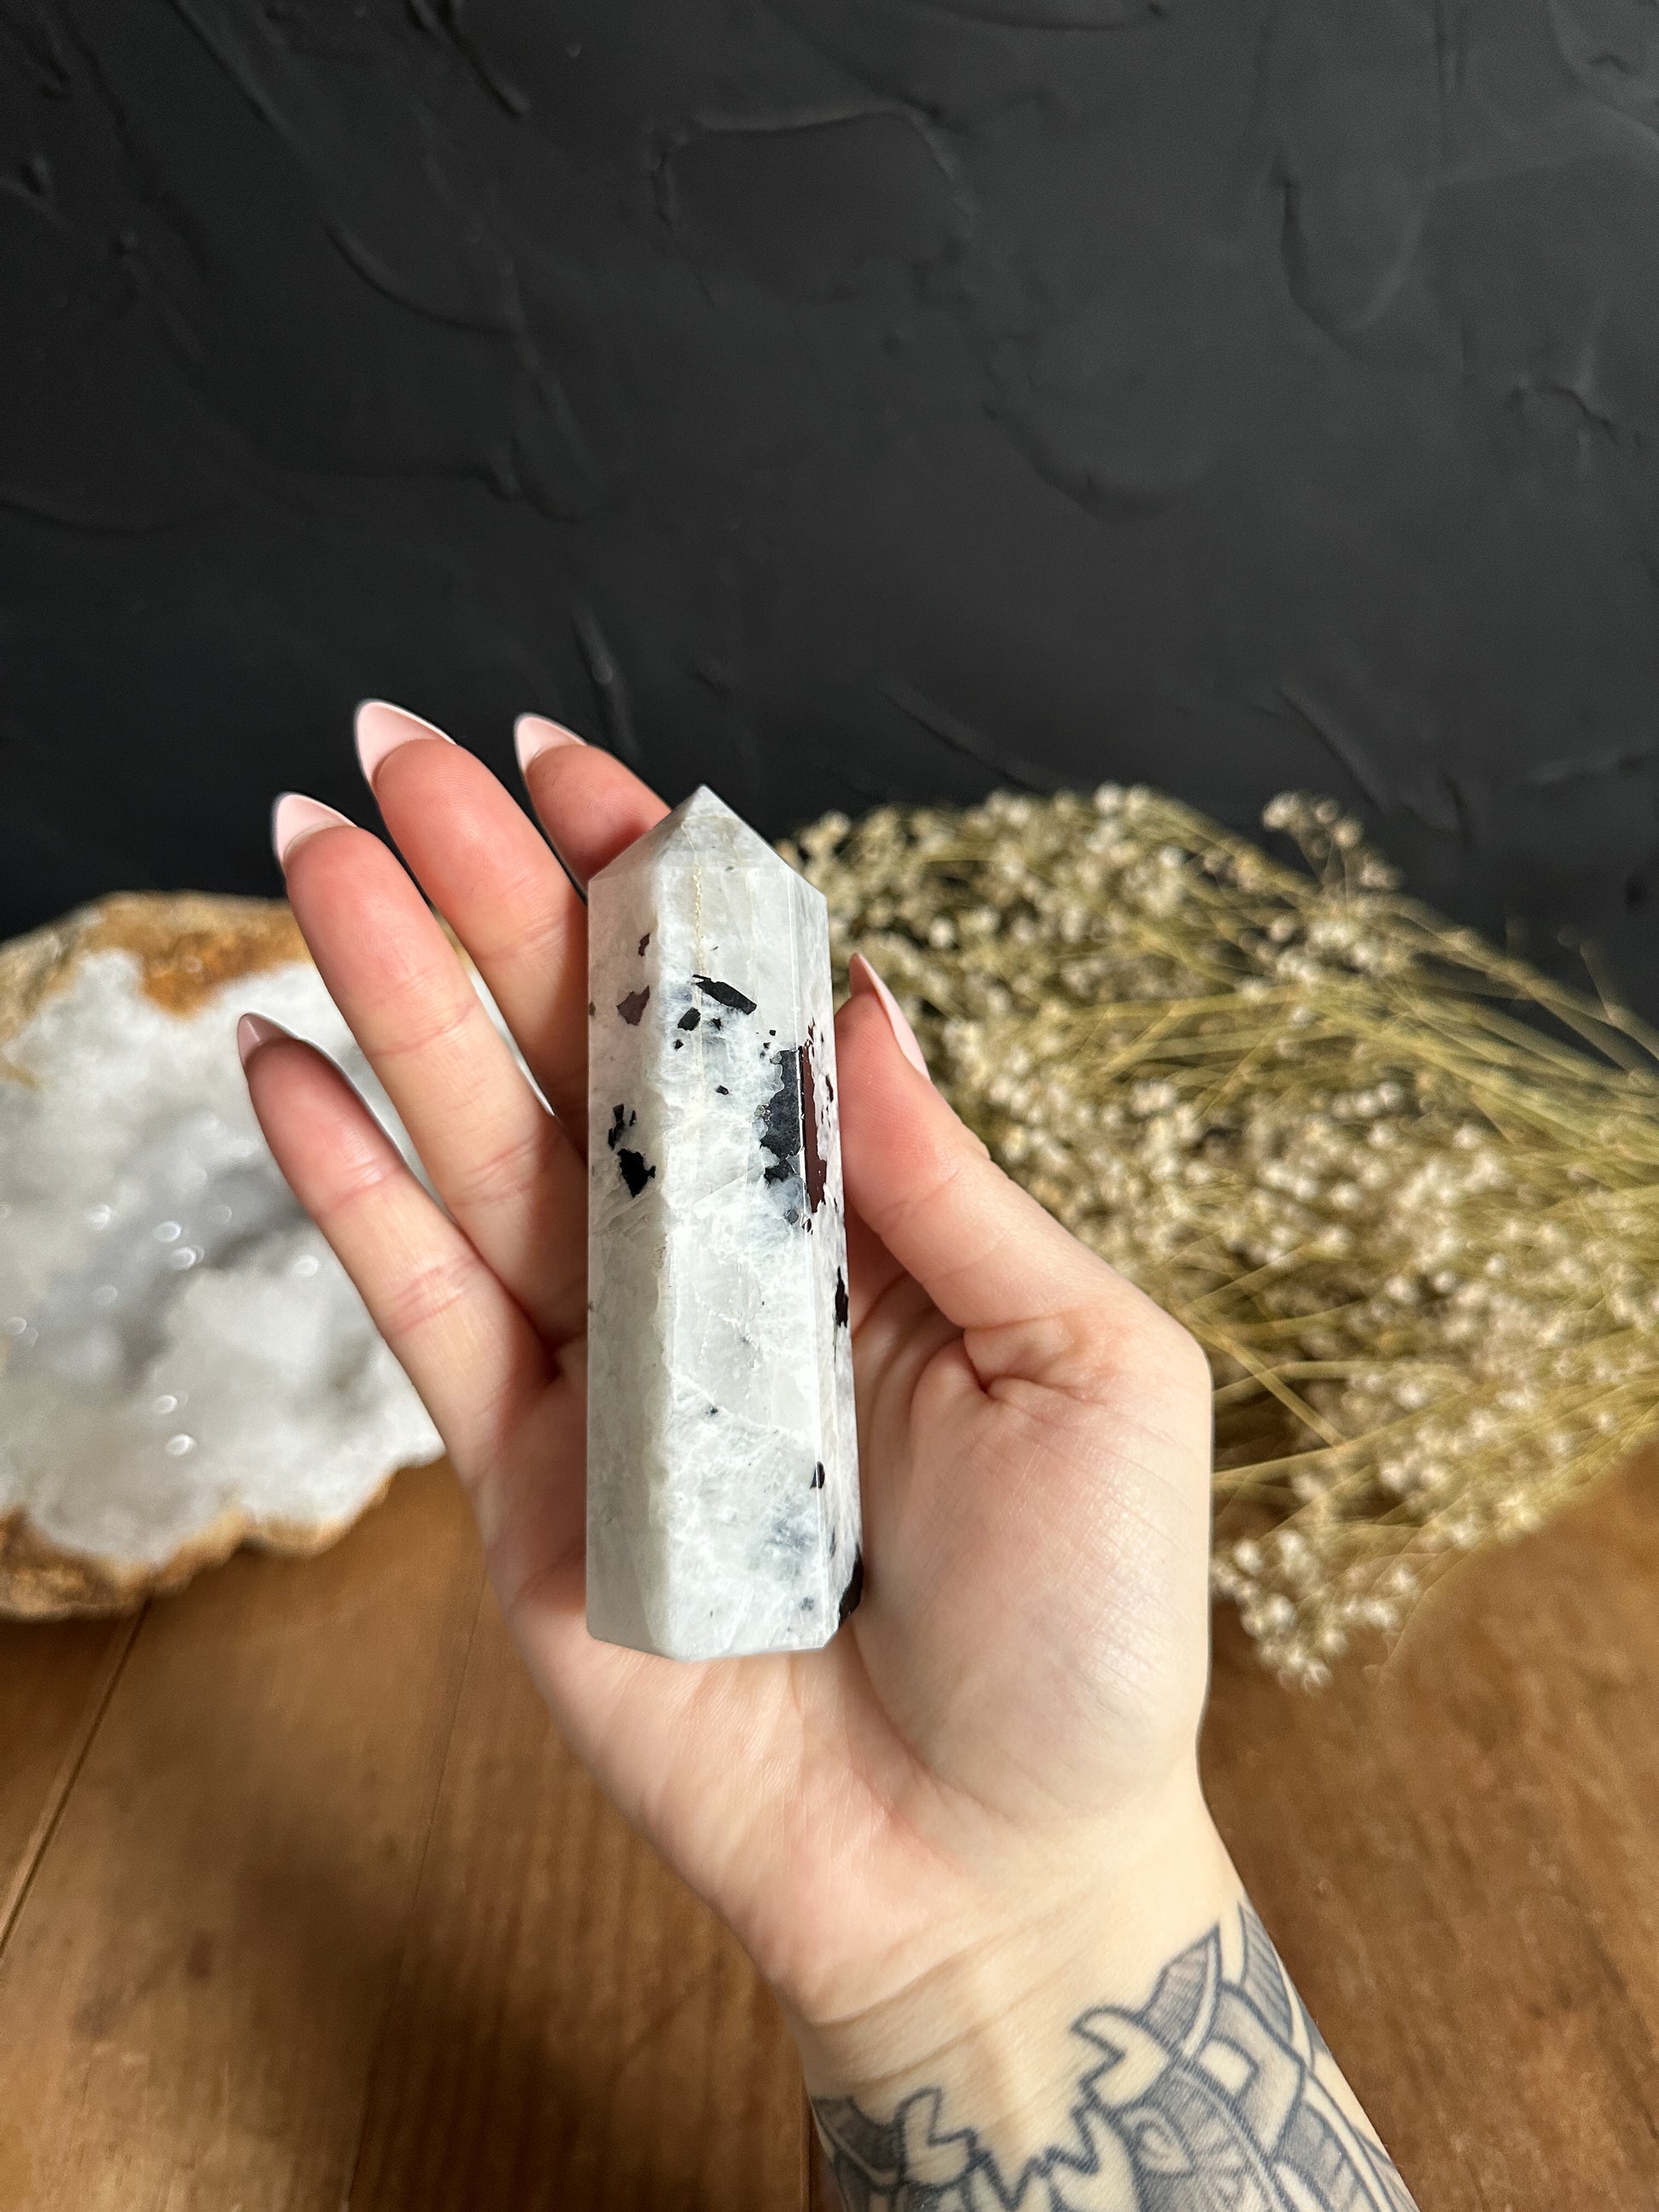 Rainbow Moonstone Tower. This beautiful piece is perfect for crystal healing, meditation, and enhancing intuition. Its serene energy promotes emotional balance and inner peace. Whether you're a collector or seeking holistic wellness, our moonstone tower is a stunning addition to any crystal collection